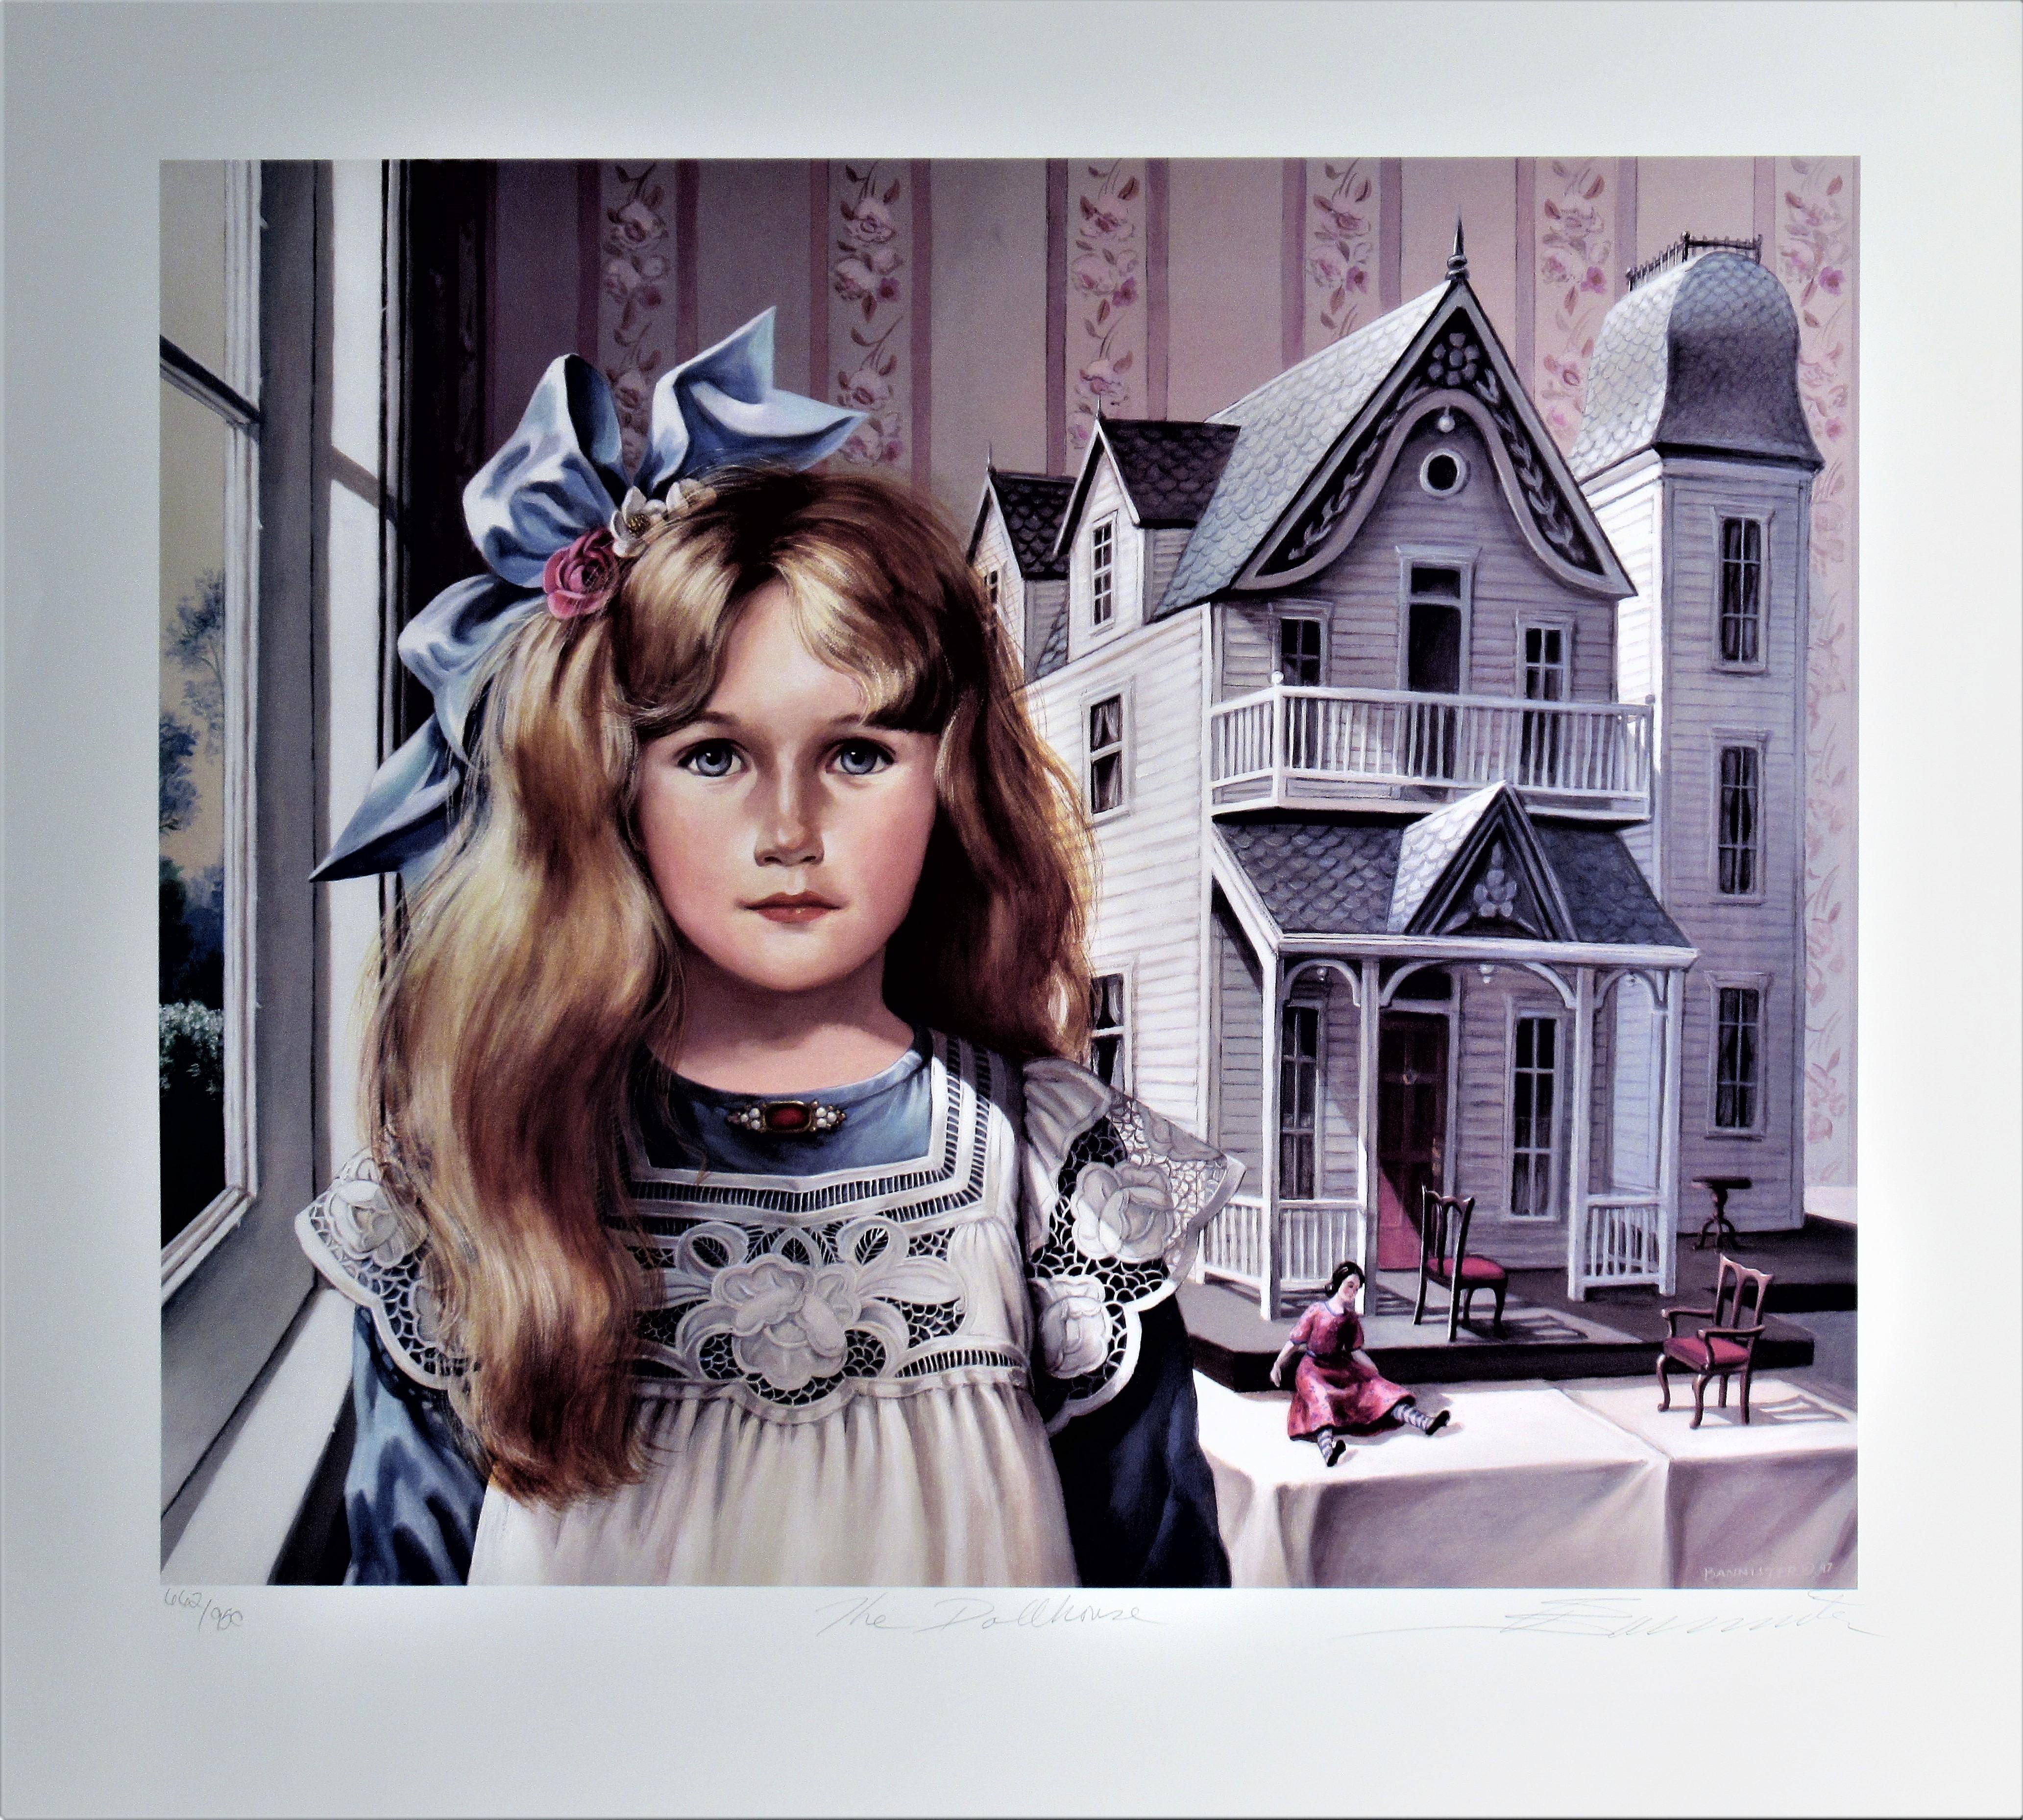 The Dollhouse - Print by Pati Bannister